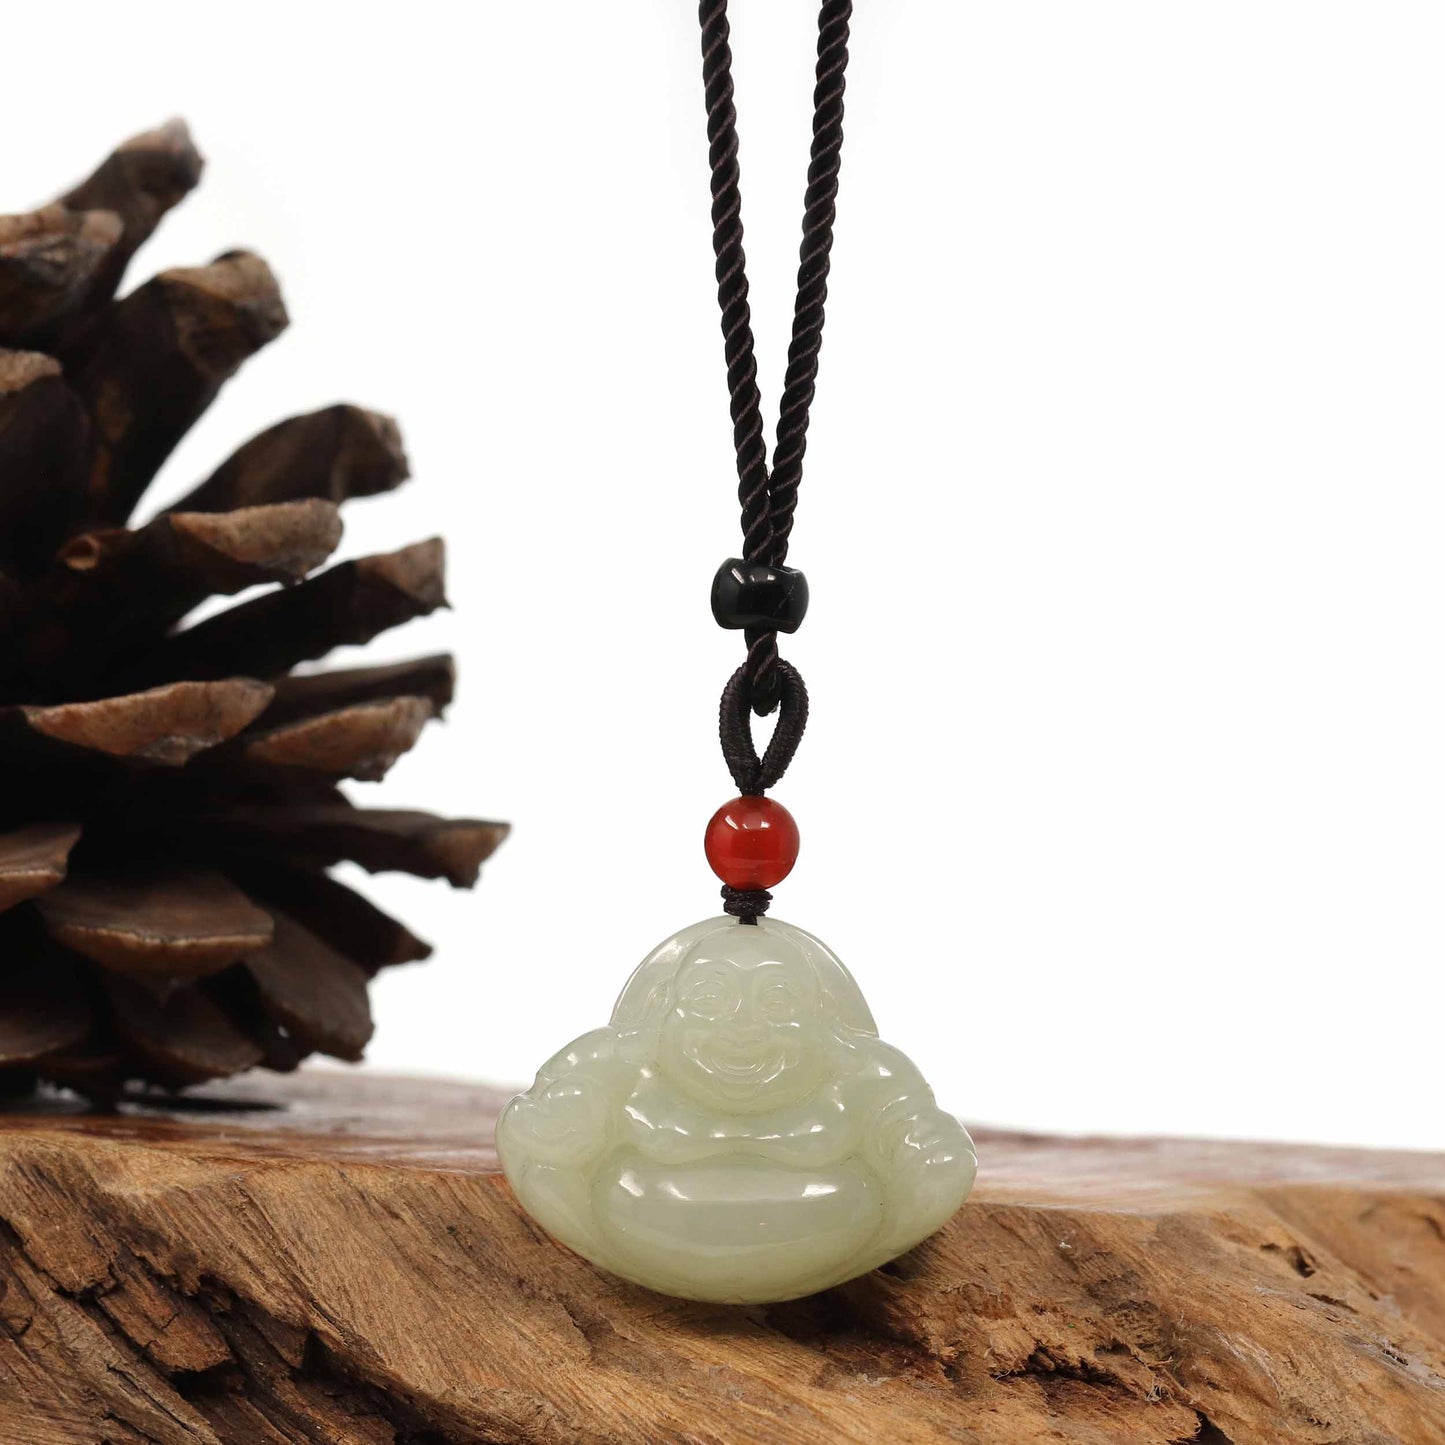 RealJade Co.¨ Jade Pendant Necklace "Laughing Buddha" Genuine White Jade Pendant Necklace